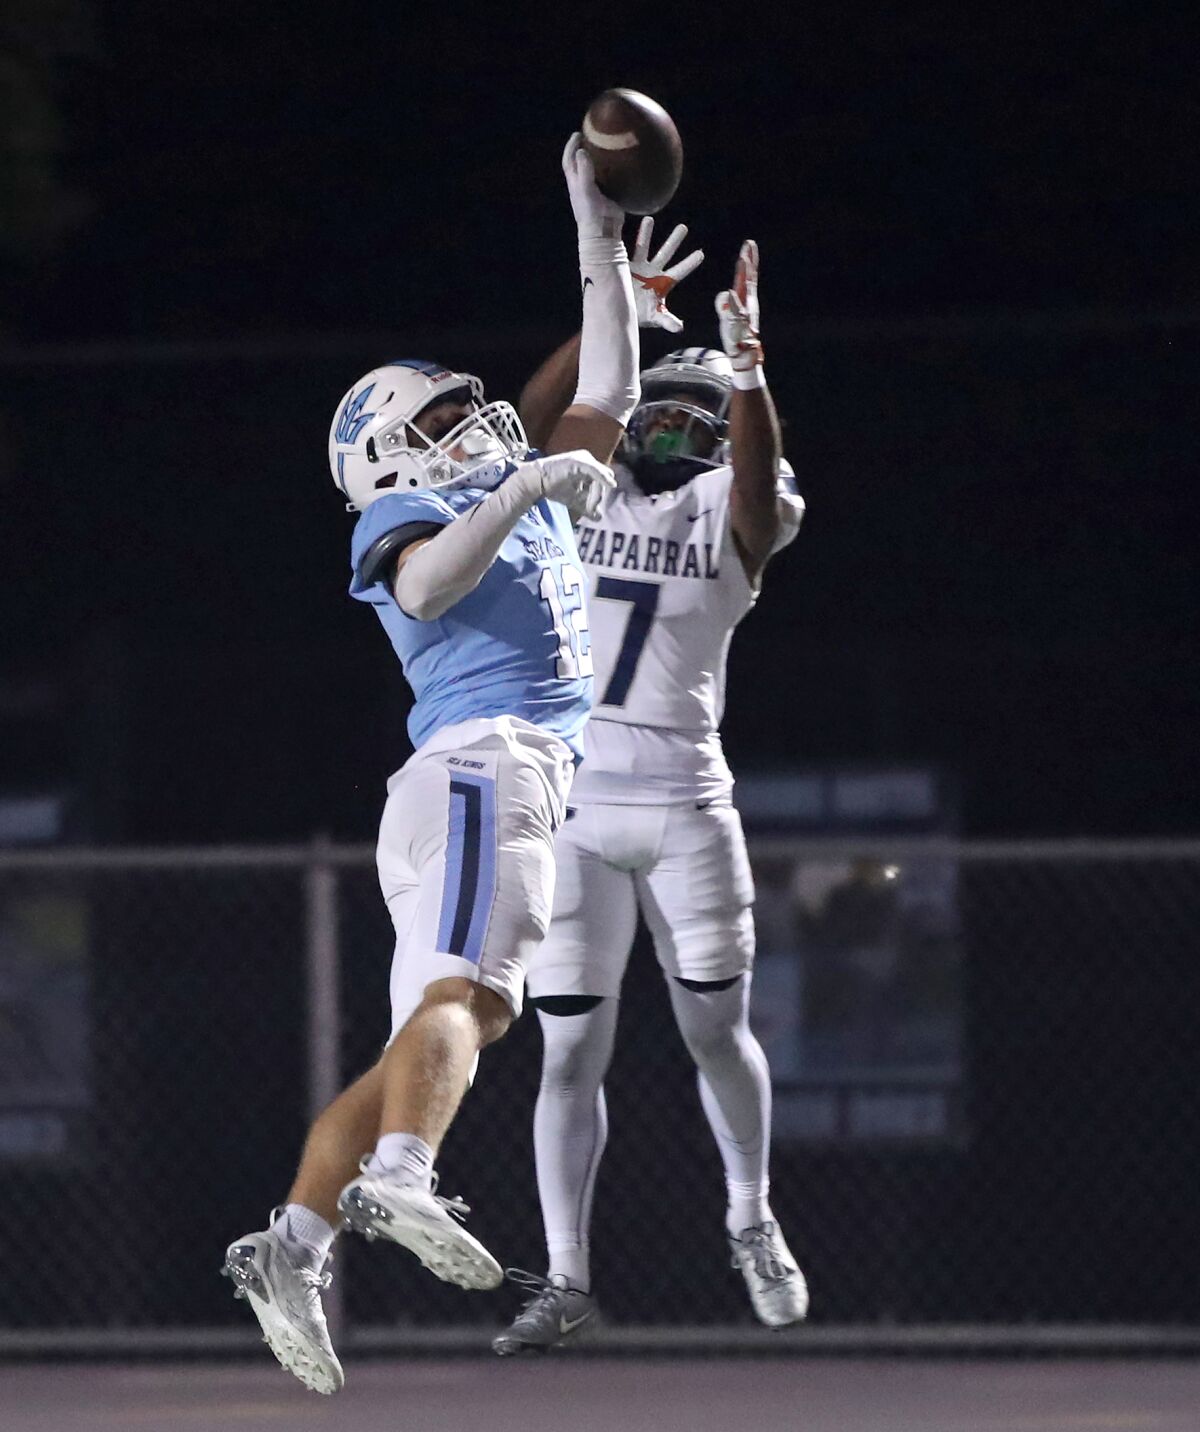 Corona del Mar cornerback Michael Lynch (12) deflects a pass in the end zone intended for Stacy Dobbins (7) on Friday.